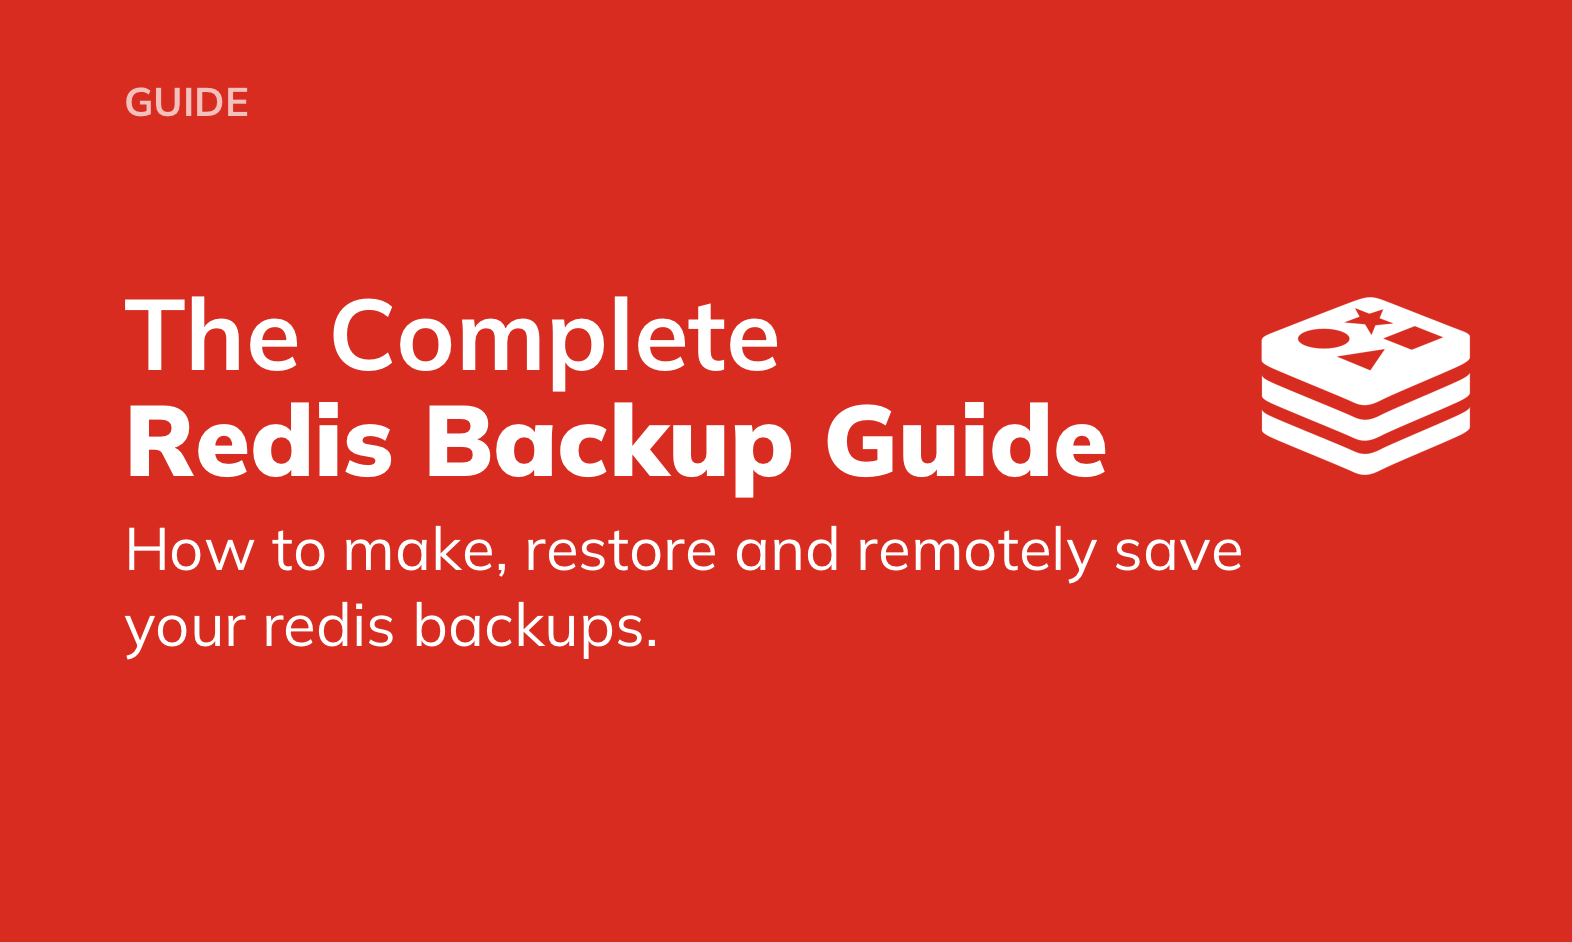 The Complete Redis Backup Guide (with examples)